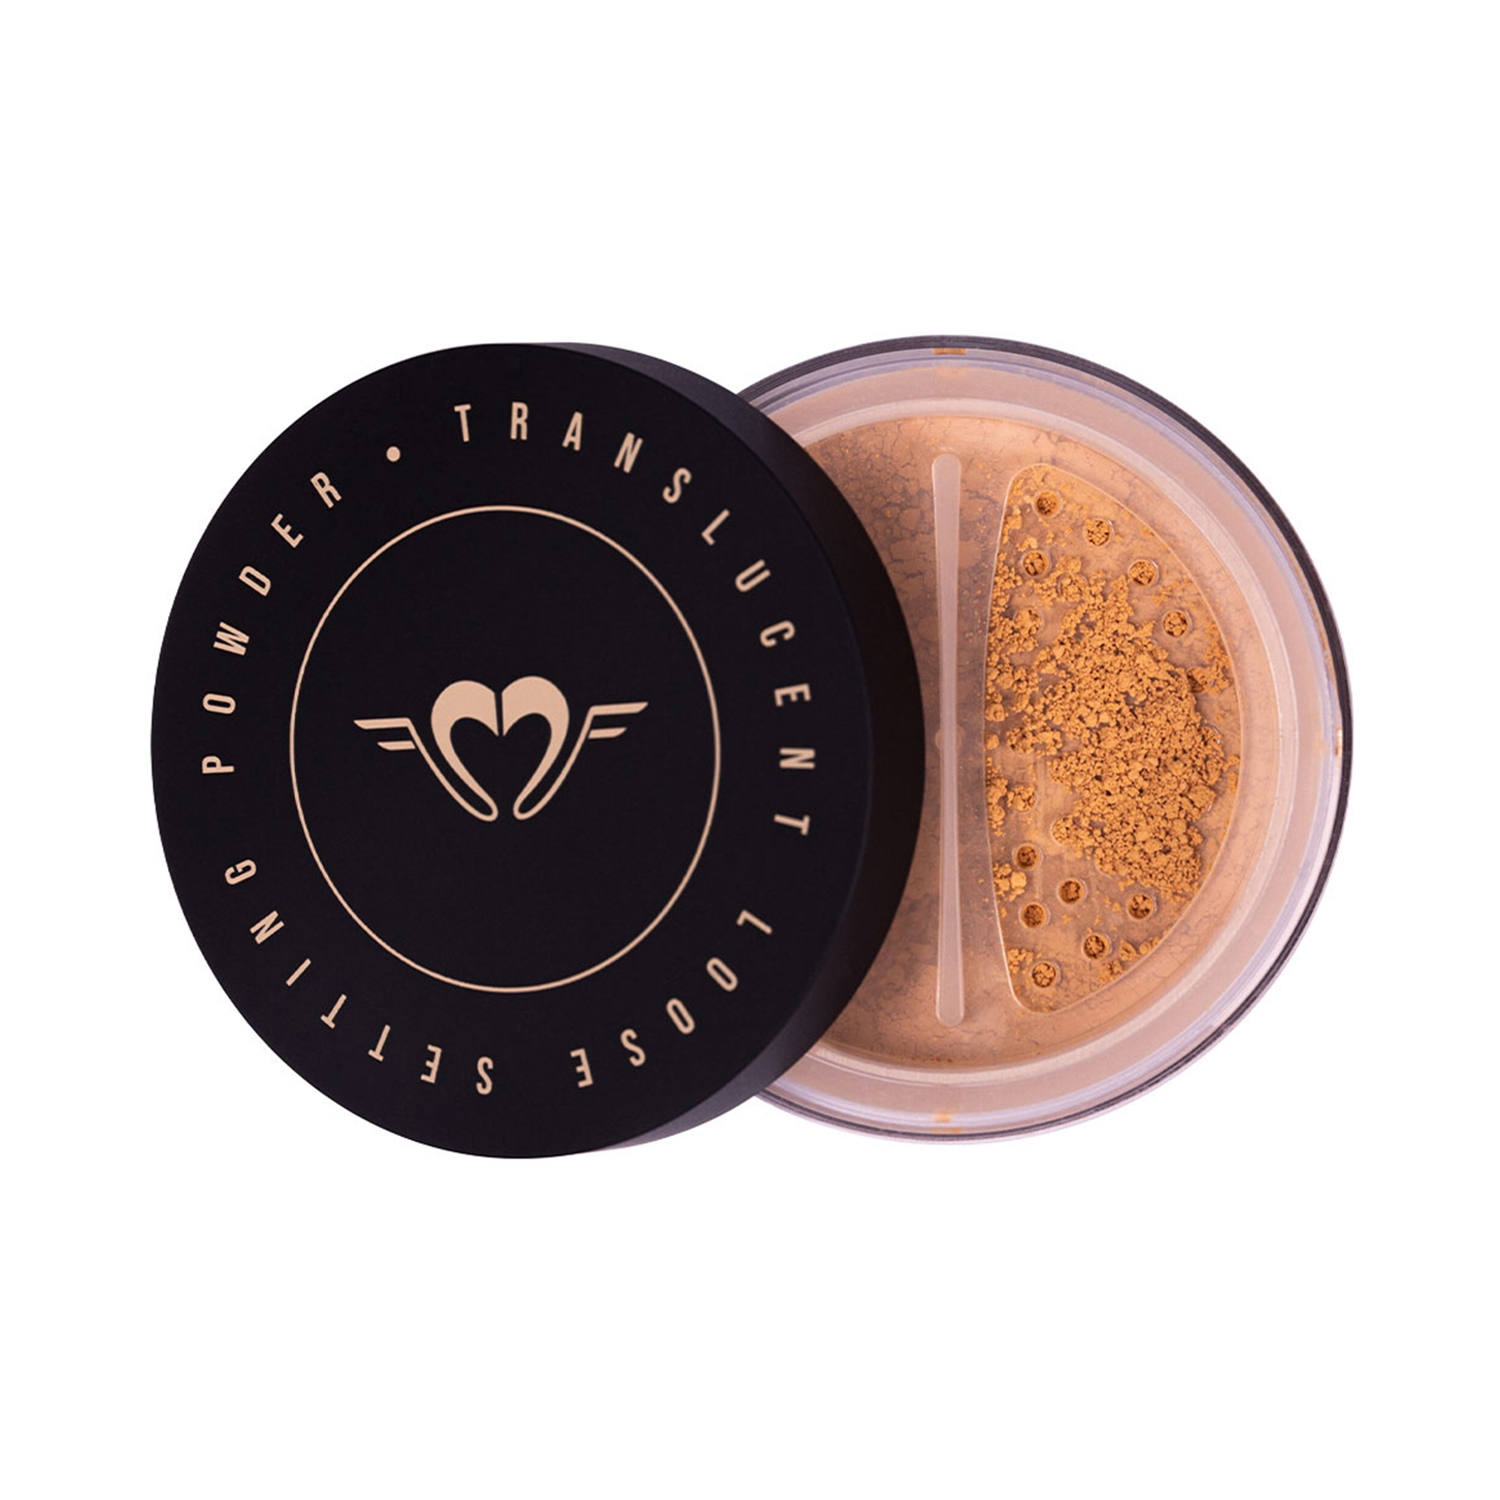 Daily Life Forever52 | Daily Life Forever52 Translucent Loose Setting Powder TLM007 - Natural Tan (7g)